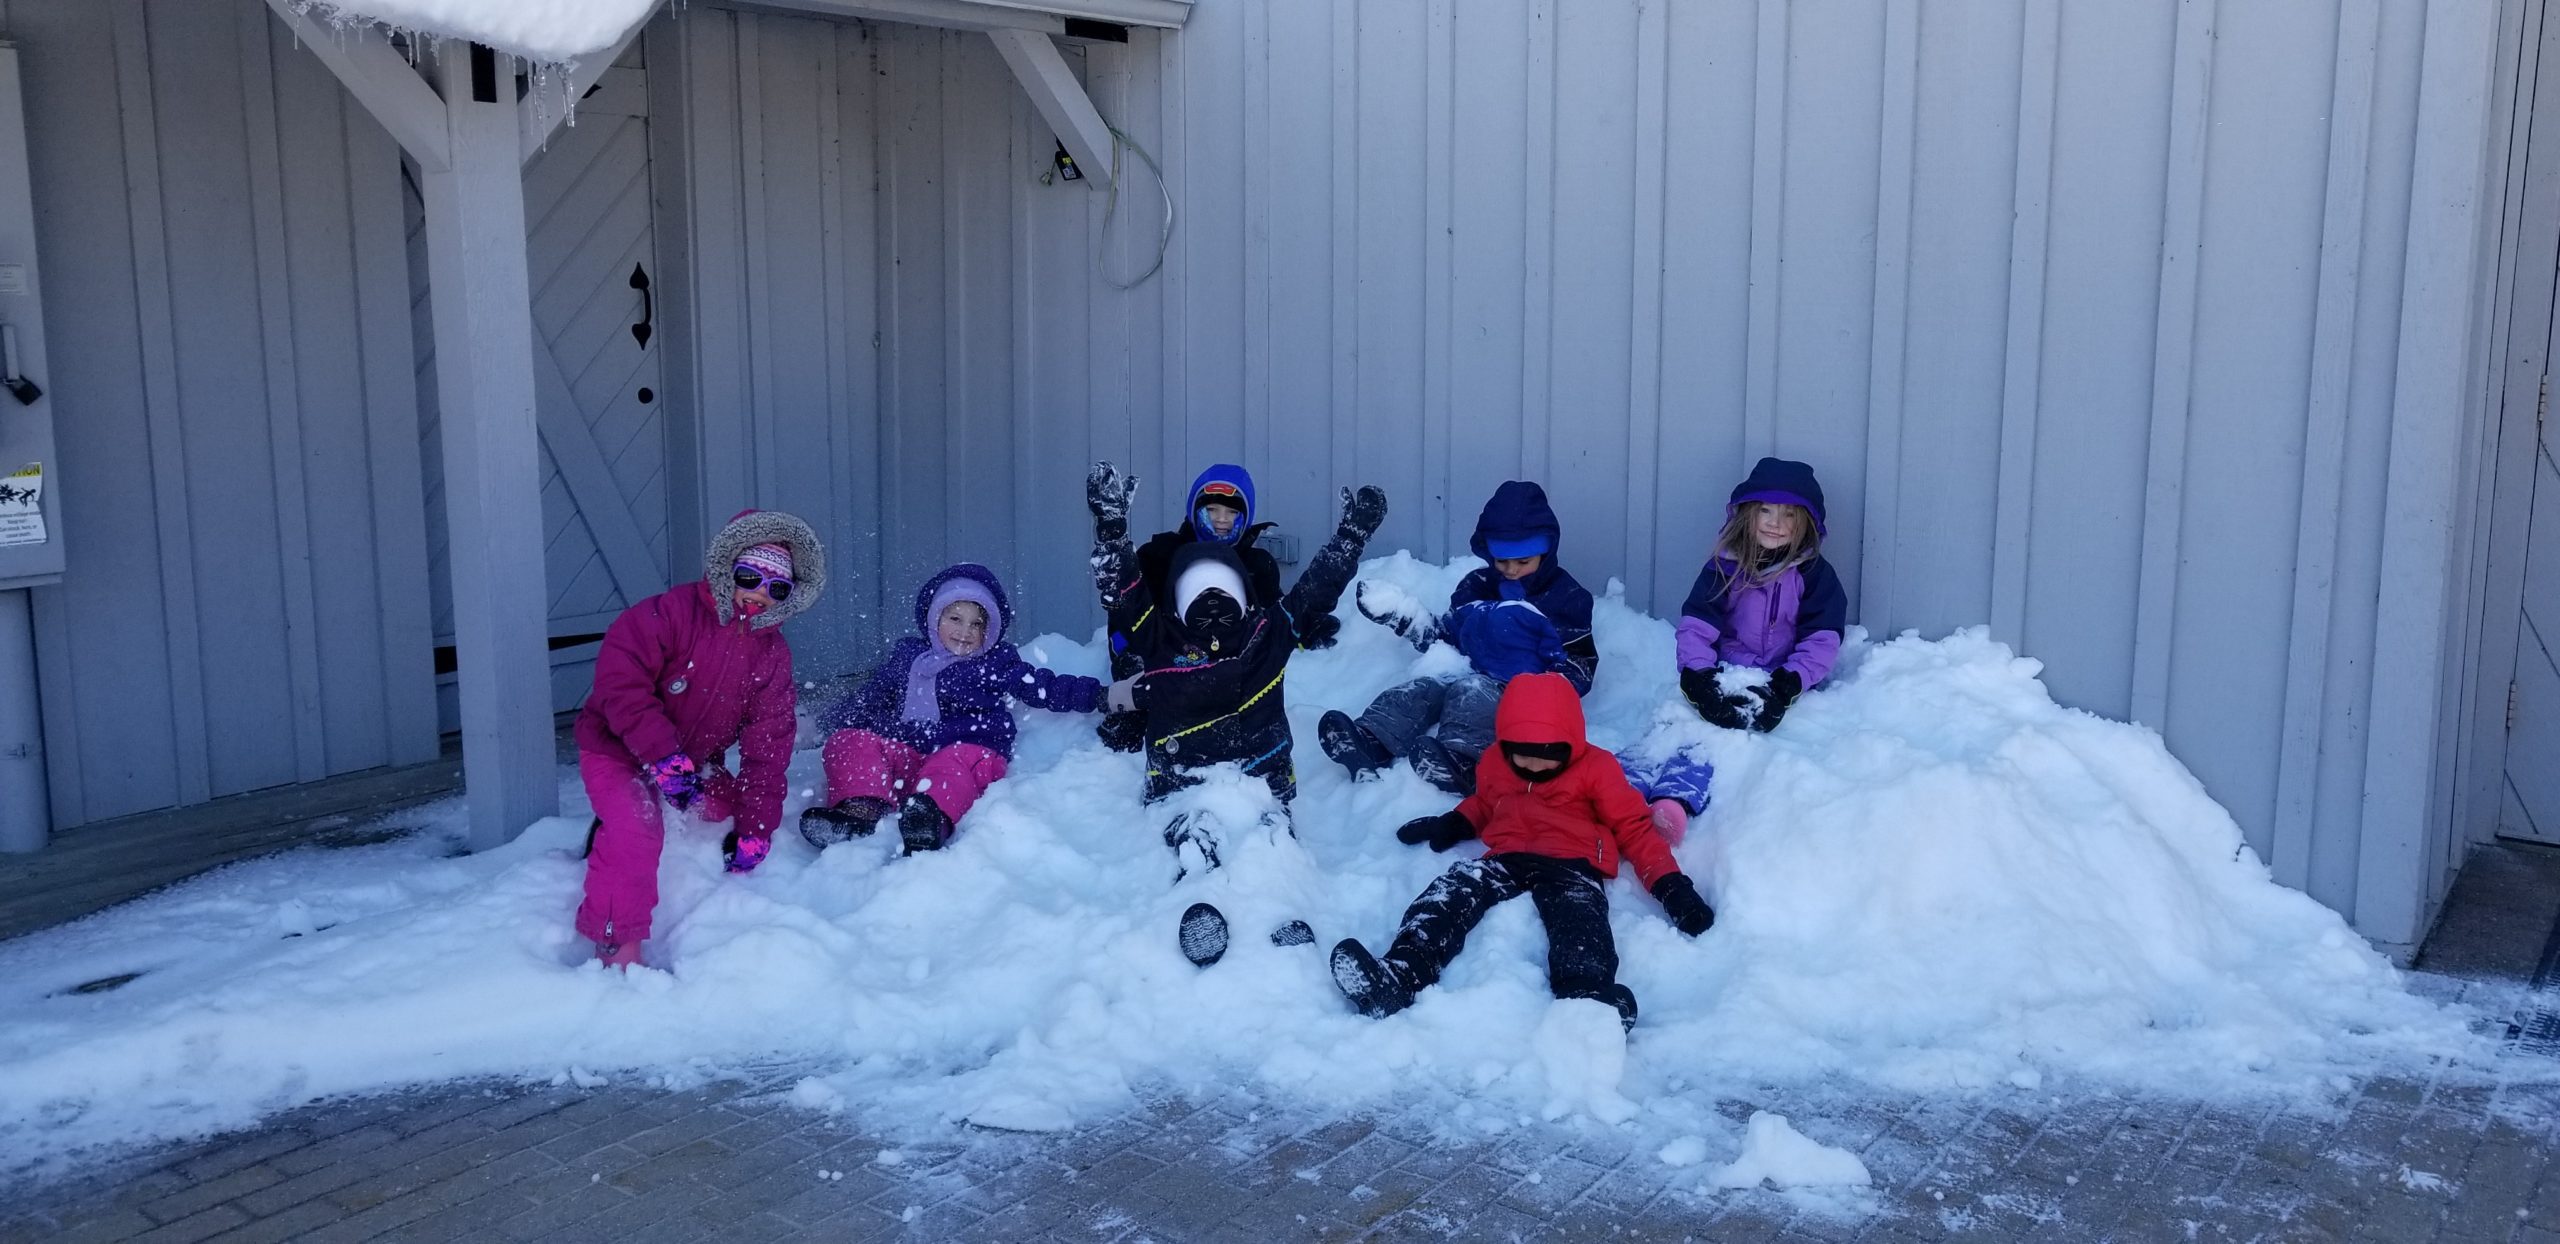 7 young kids dressed in winter gear sit on a pile of snow